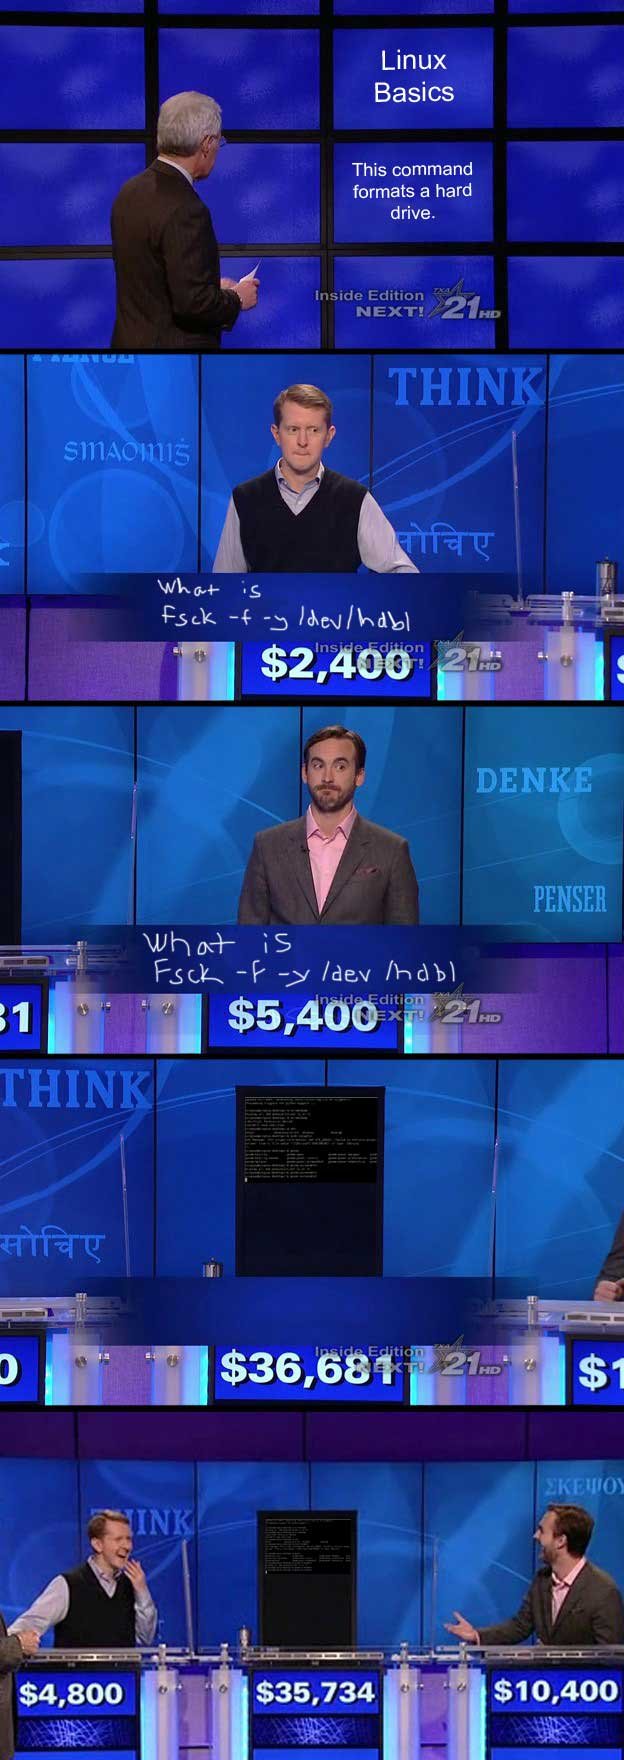 How to beat Watson. Saw this and laughed.. Geek Humor&lt;br /&gt; Watson is IBM's super computer that appeared on jeopardy... the question was &amp;quot;this co